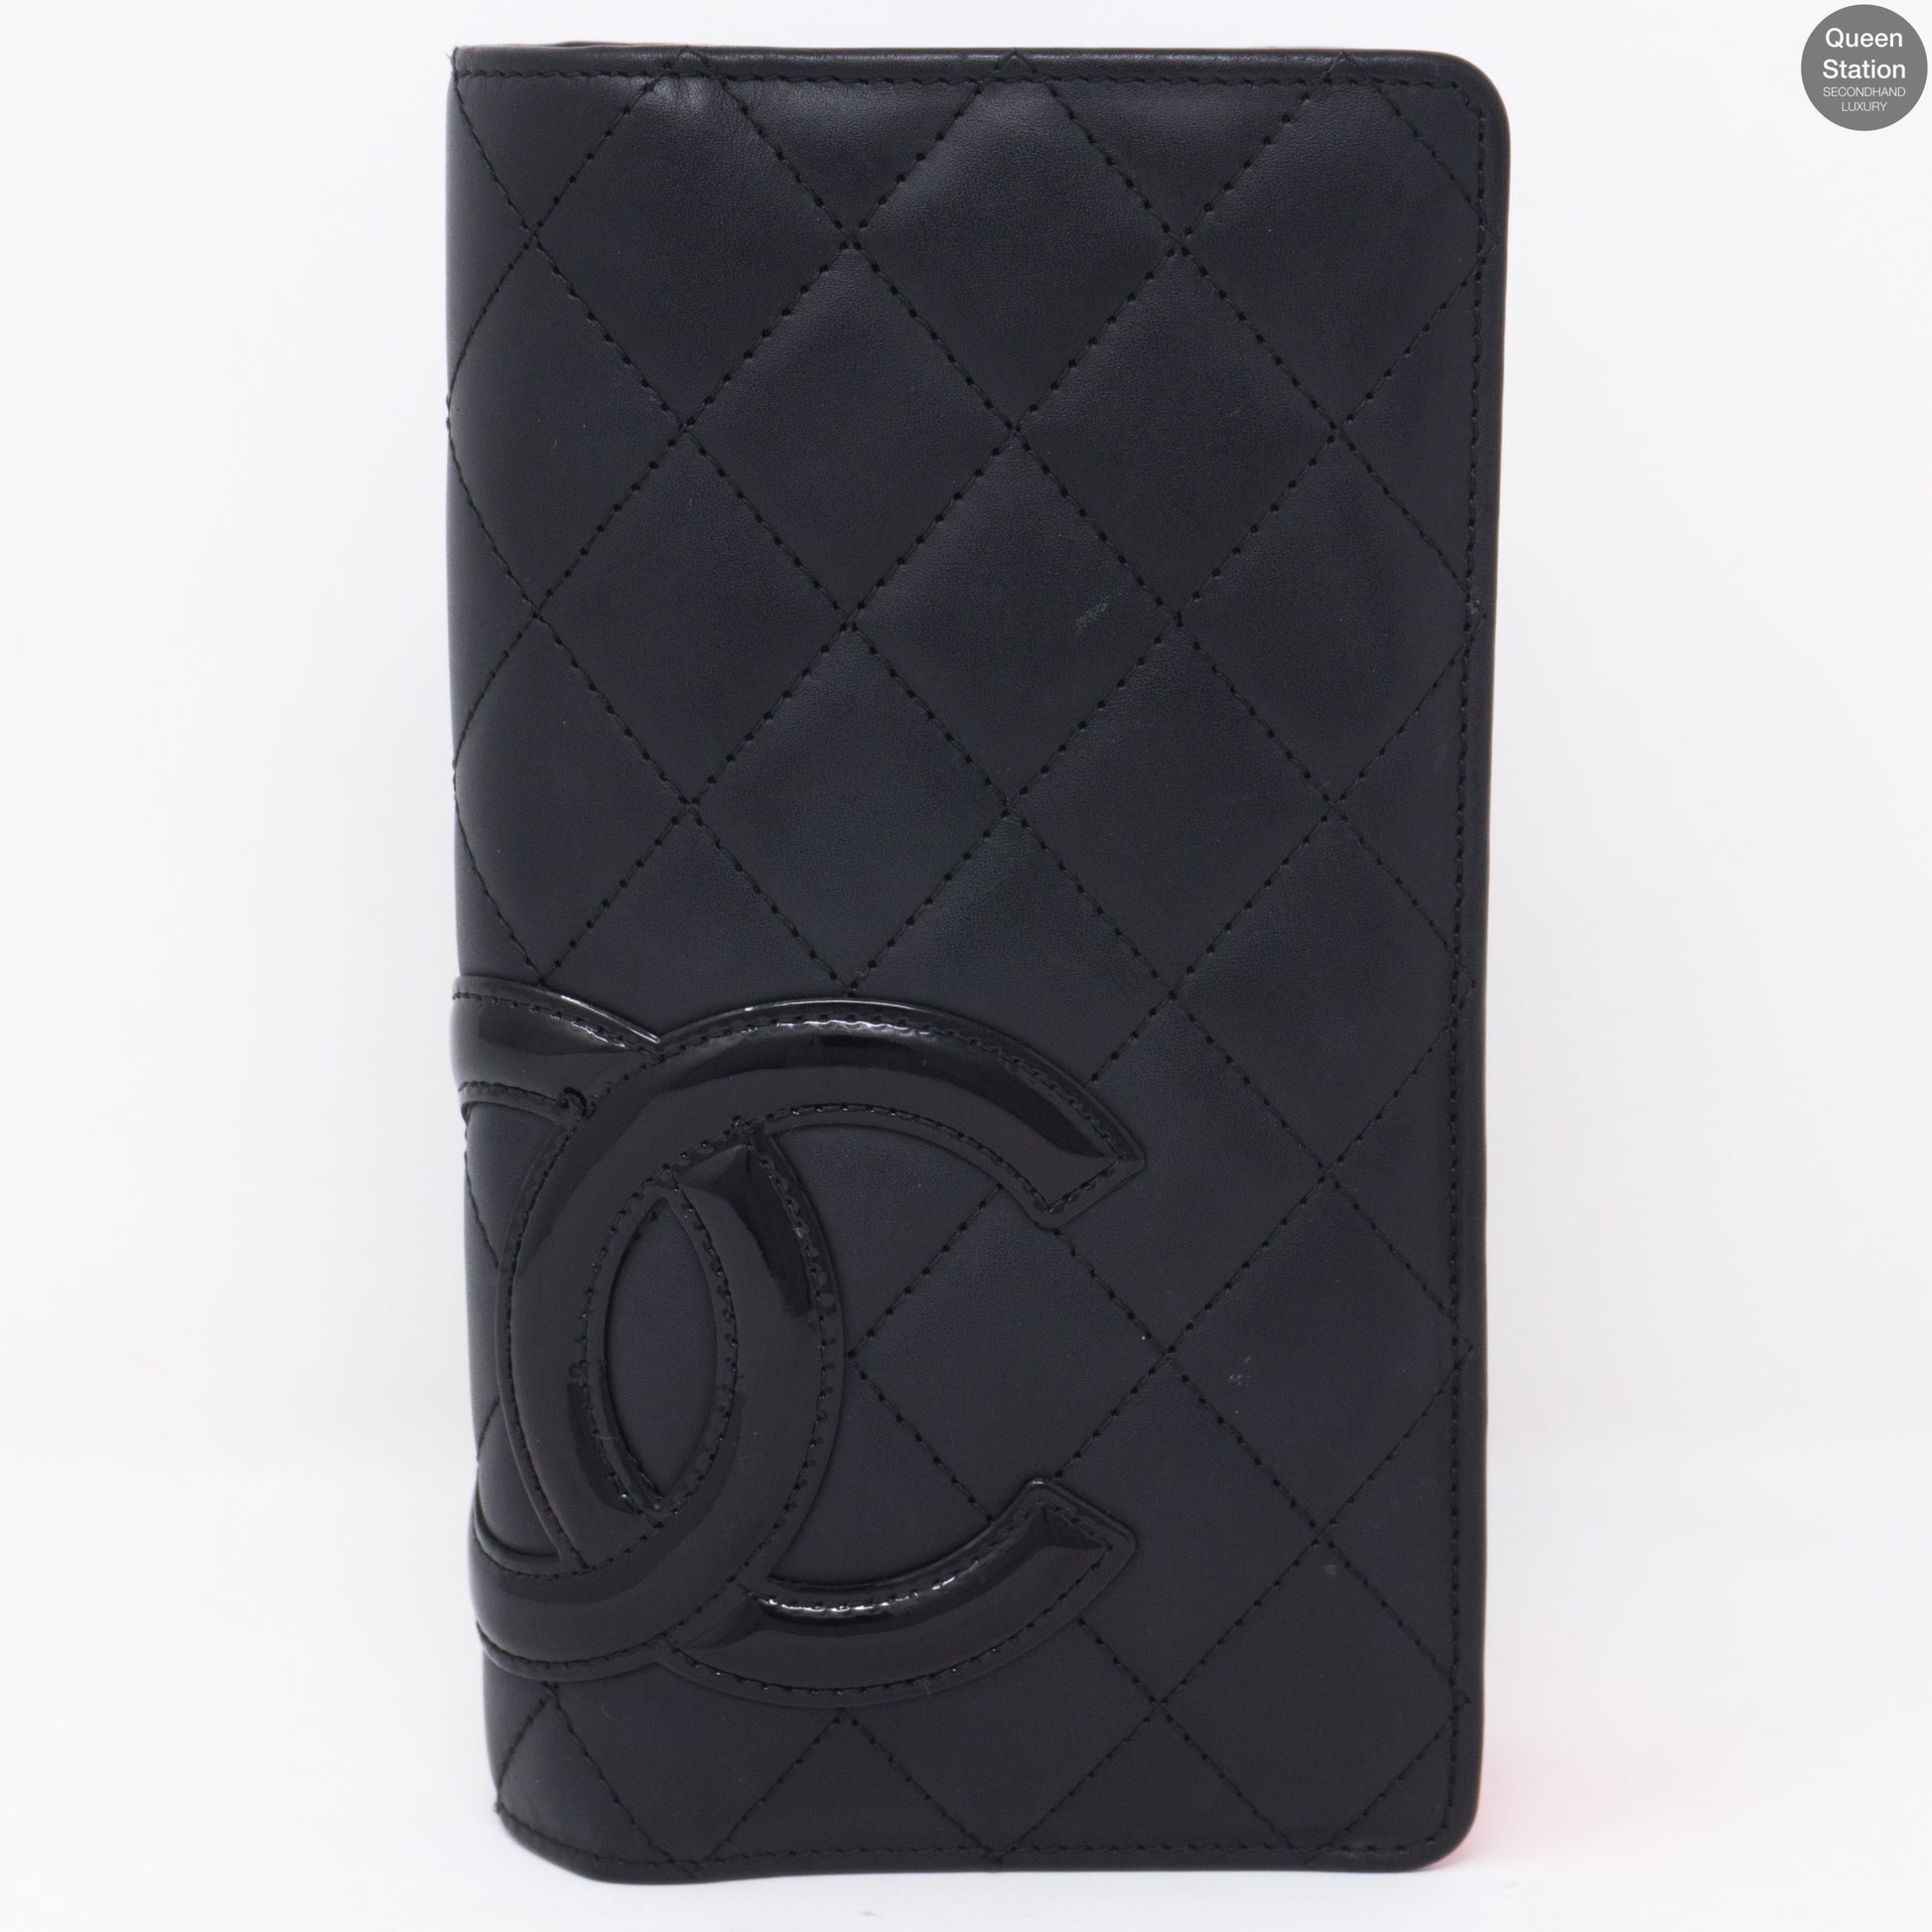 Chanel – Cambon Long Leather Wallet – Queen Station